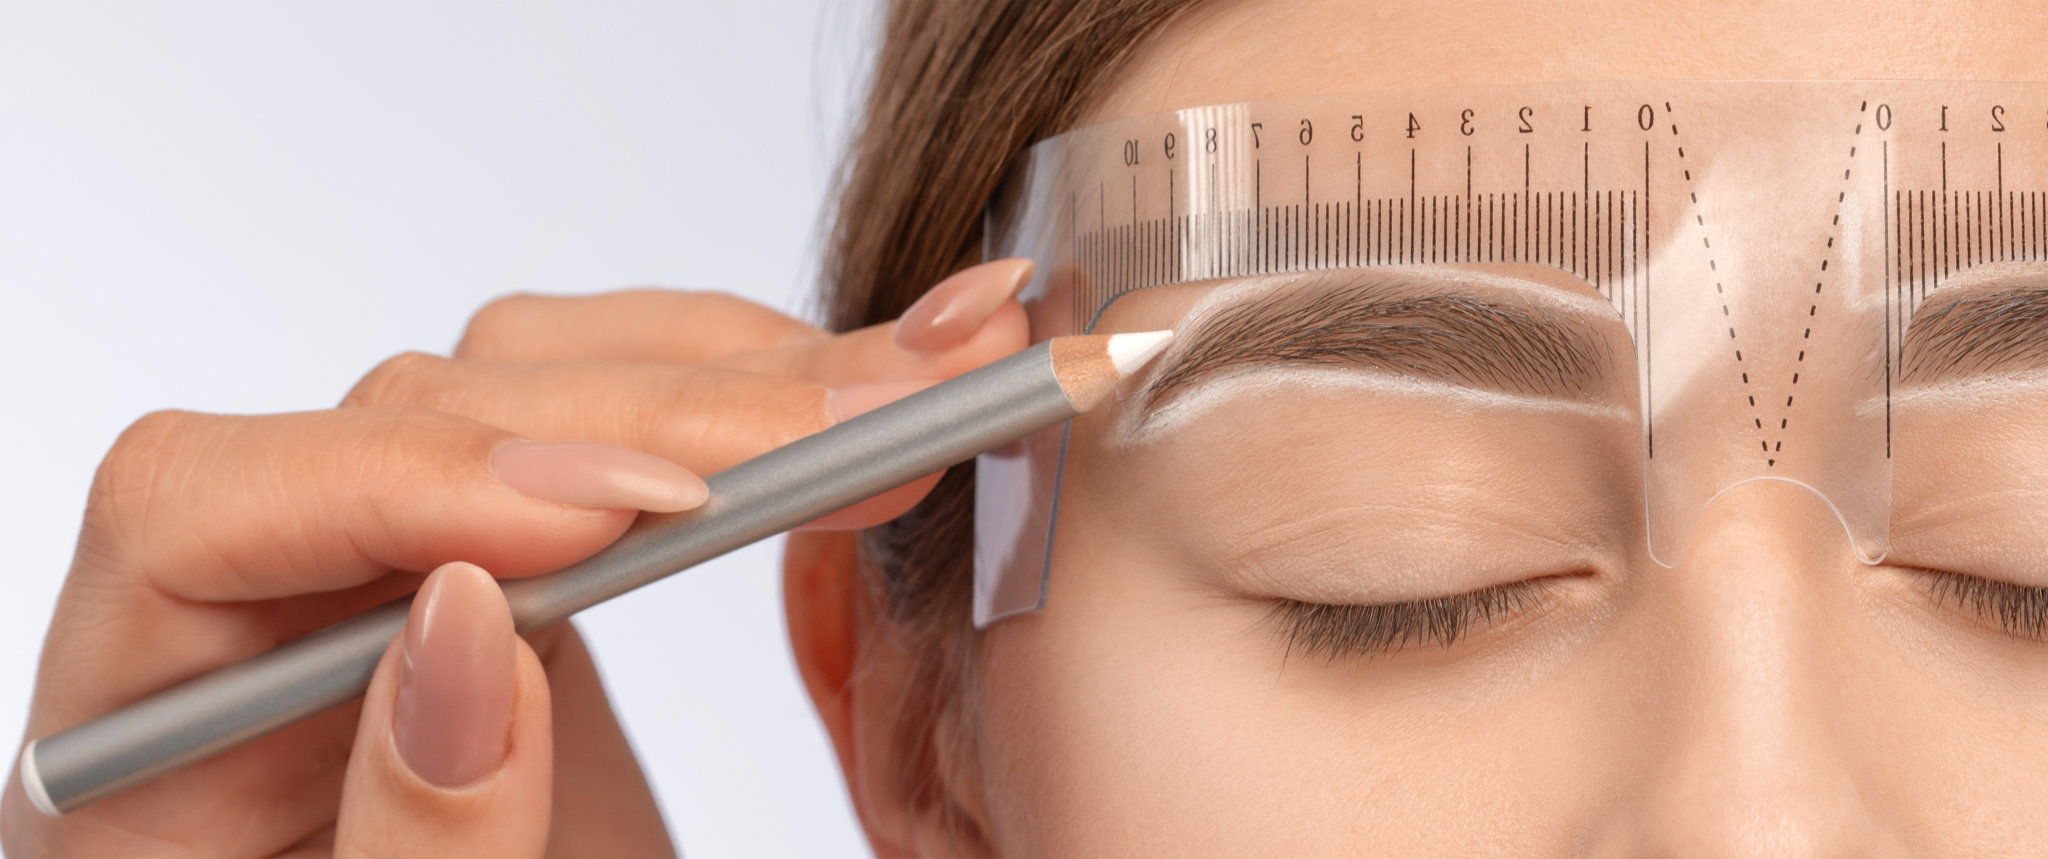 Woman undergoing brow shaping